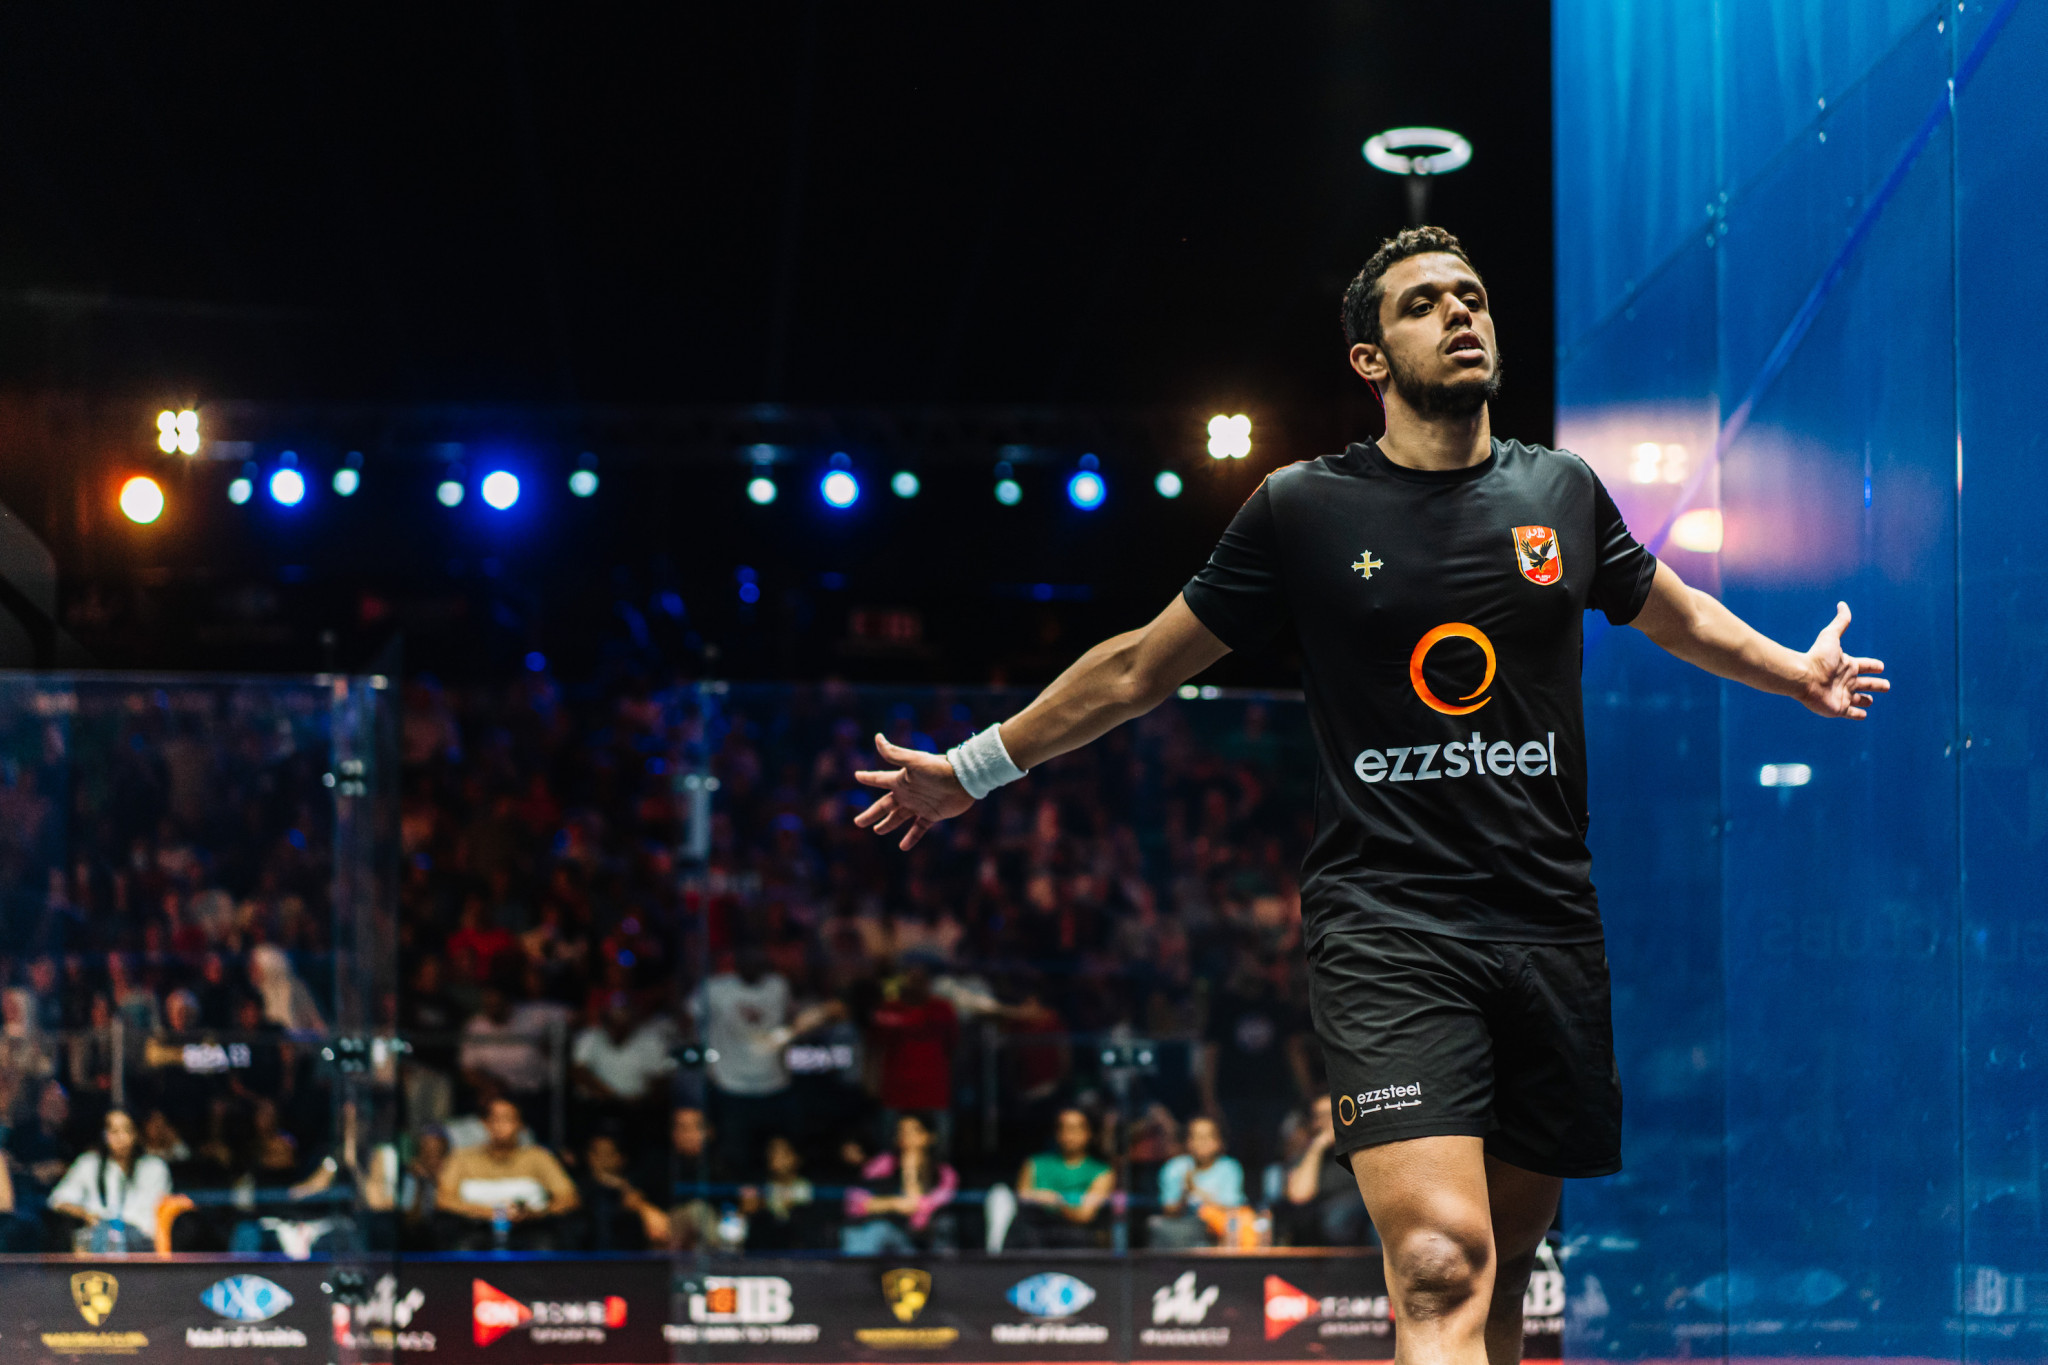 Asal causes upset in semis of squash’s World Tour Finals after beating men’s top seed Farag